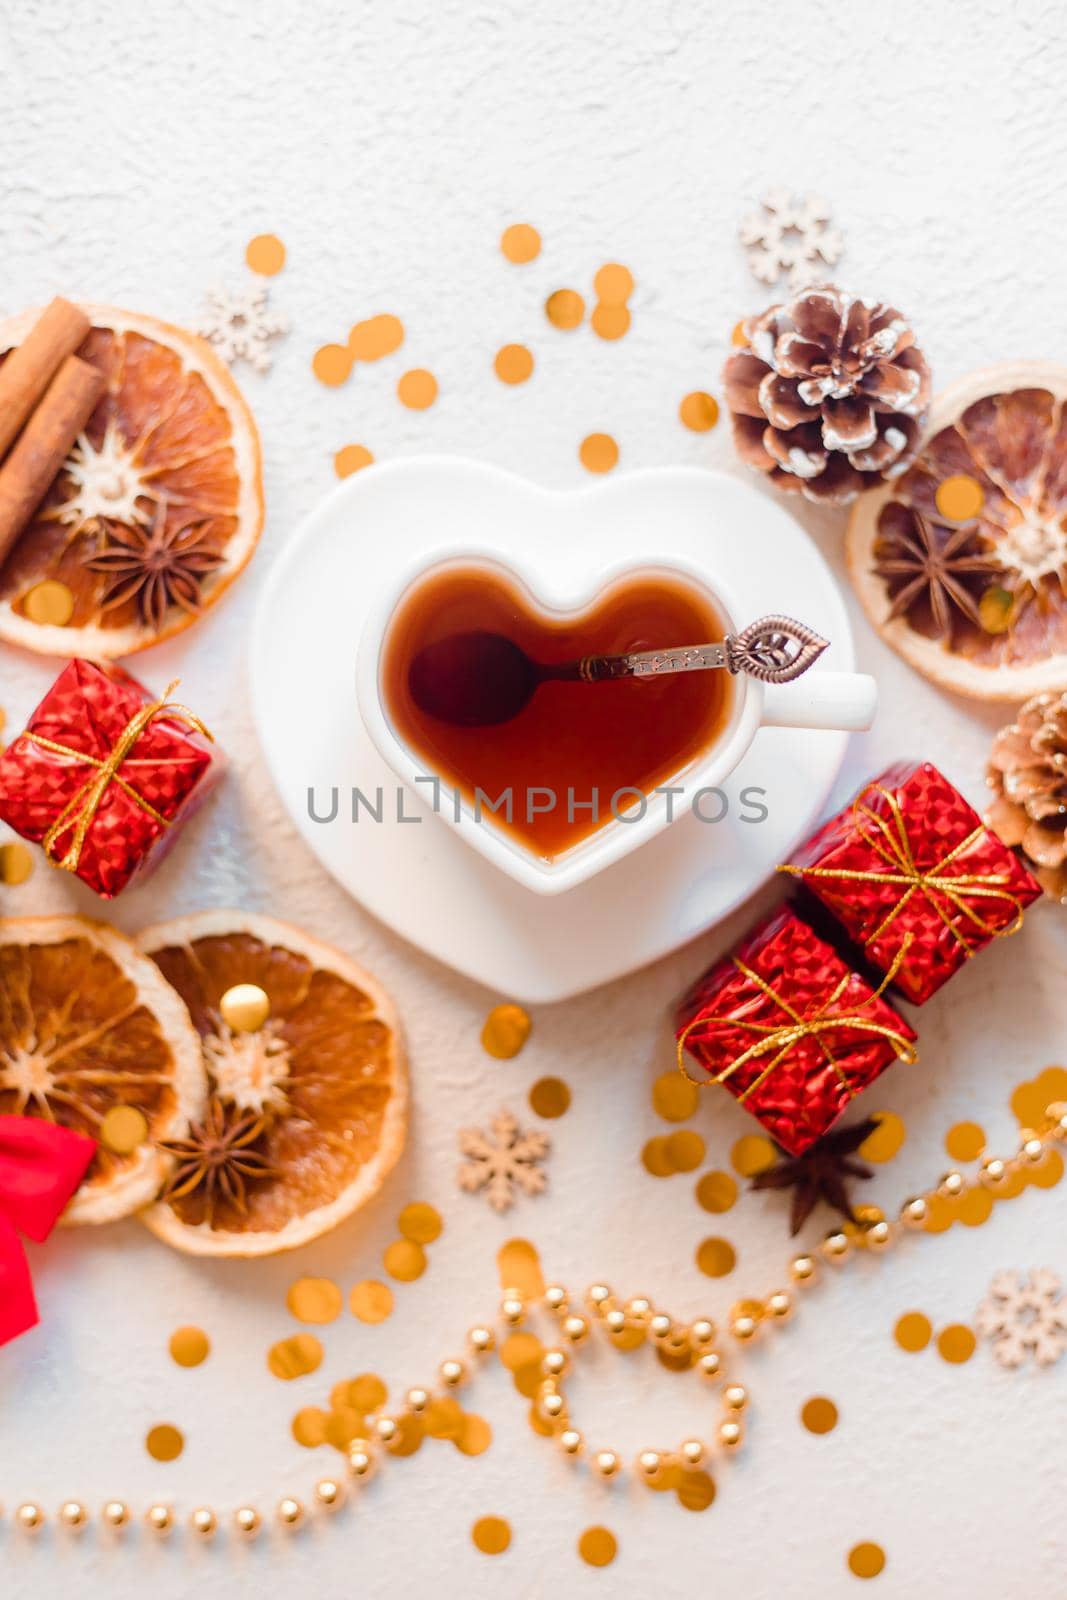 New Year 's tea on a white background . Glitter and white background. Holiday. Holiday decorations. Hot tea . The layout is a festive tea party. Christmas